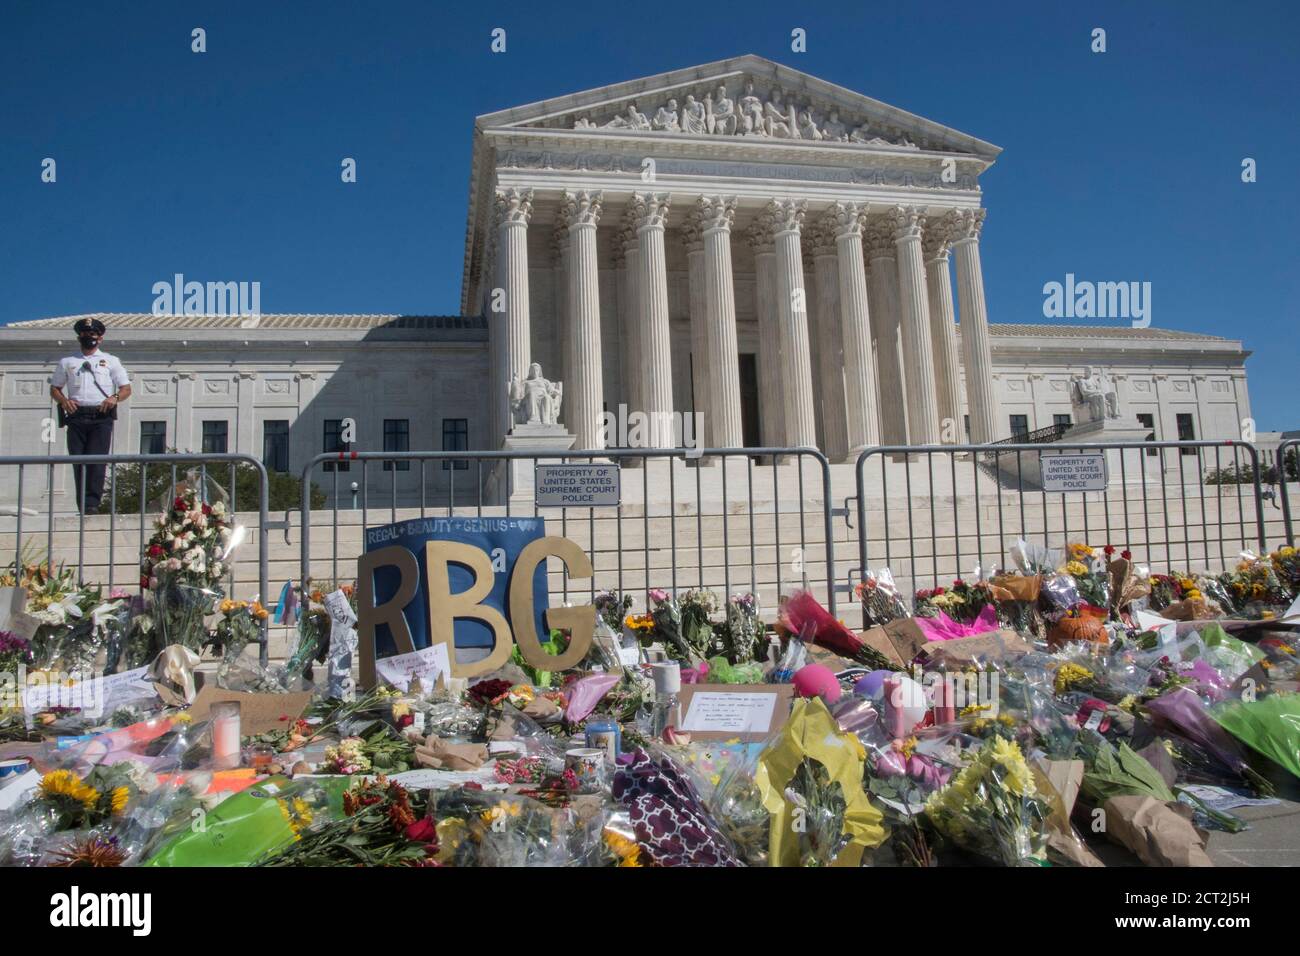 Washington DC,September 20 2020 USA: An overpowering scent of flowers fills the air at the Supreme Court building in Washington DC, where thousands of Stock Photo